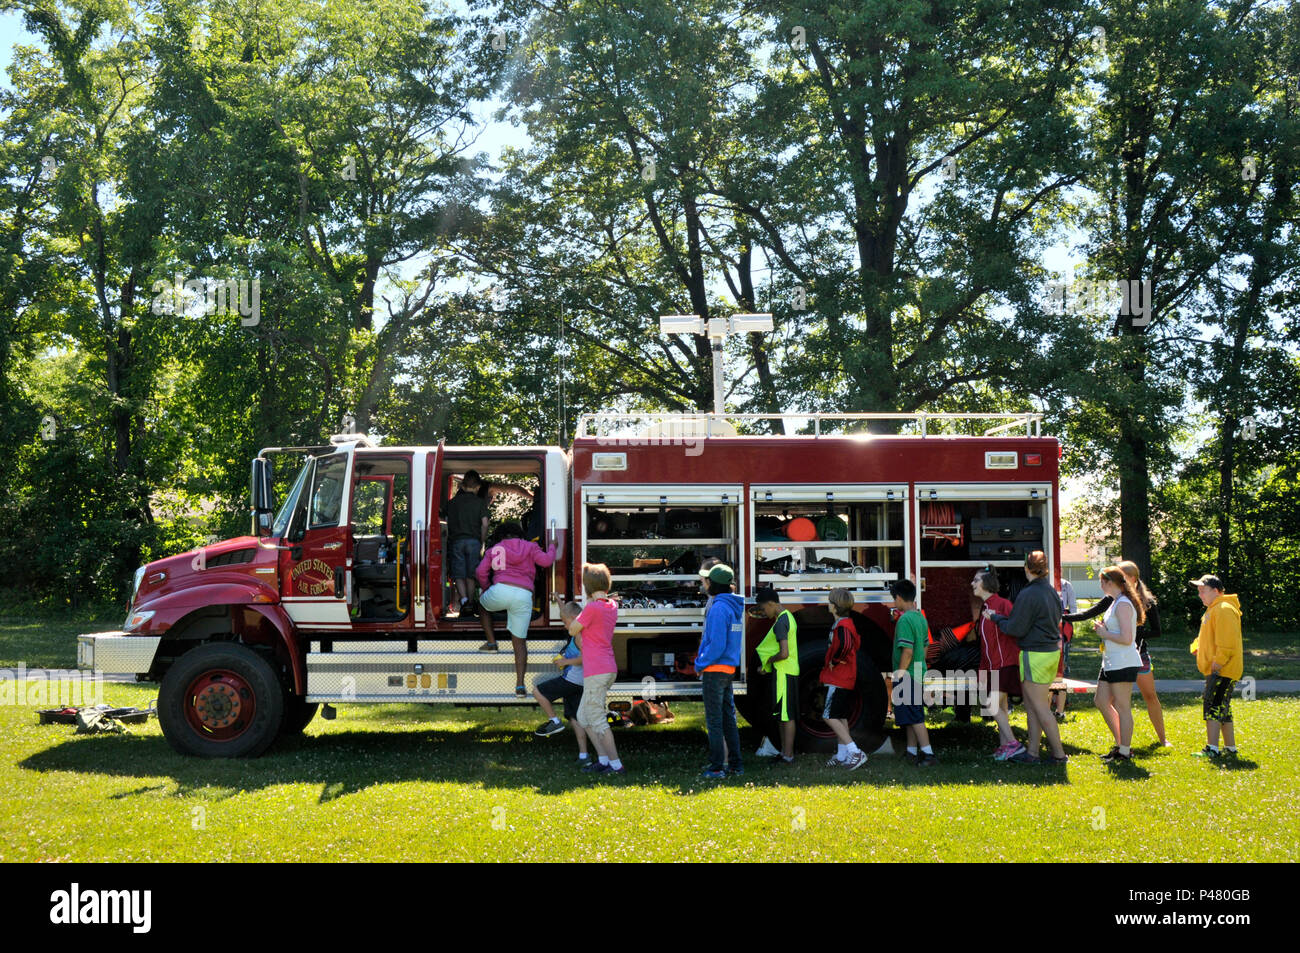 The 122nd Fighter Wing Fire Squadron opened up the doors to it's fire trucks for the campers at Red Cedar during a fire safety presentation June 29, 2016 at Camp Red Cedar, Fort Wayne, In. Camp Red Cedar is a theraputic camp for children and young adults that live with autism. The 122nd Fire Squadron regularly gives safety presentations for area organizations. (U.S.Air National Guard photo by Staff Sgt. Rana Franklin/released) Stock Photo